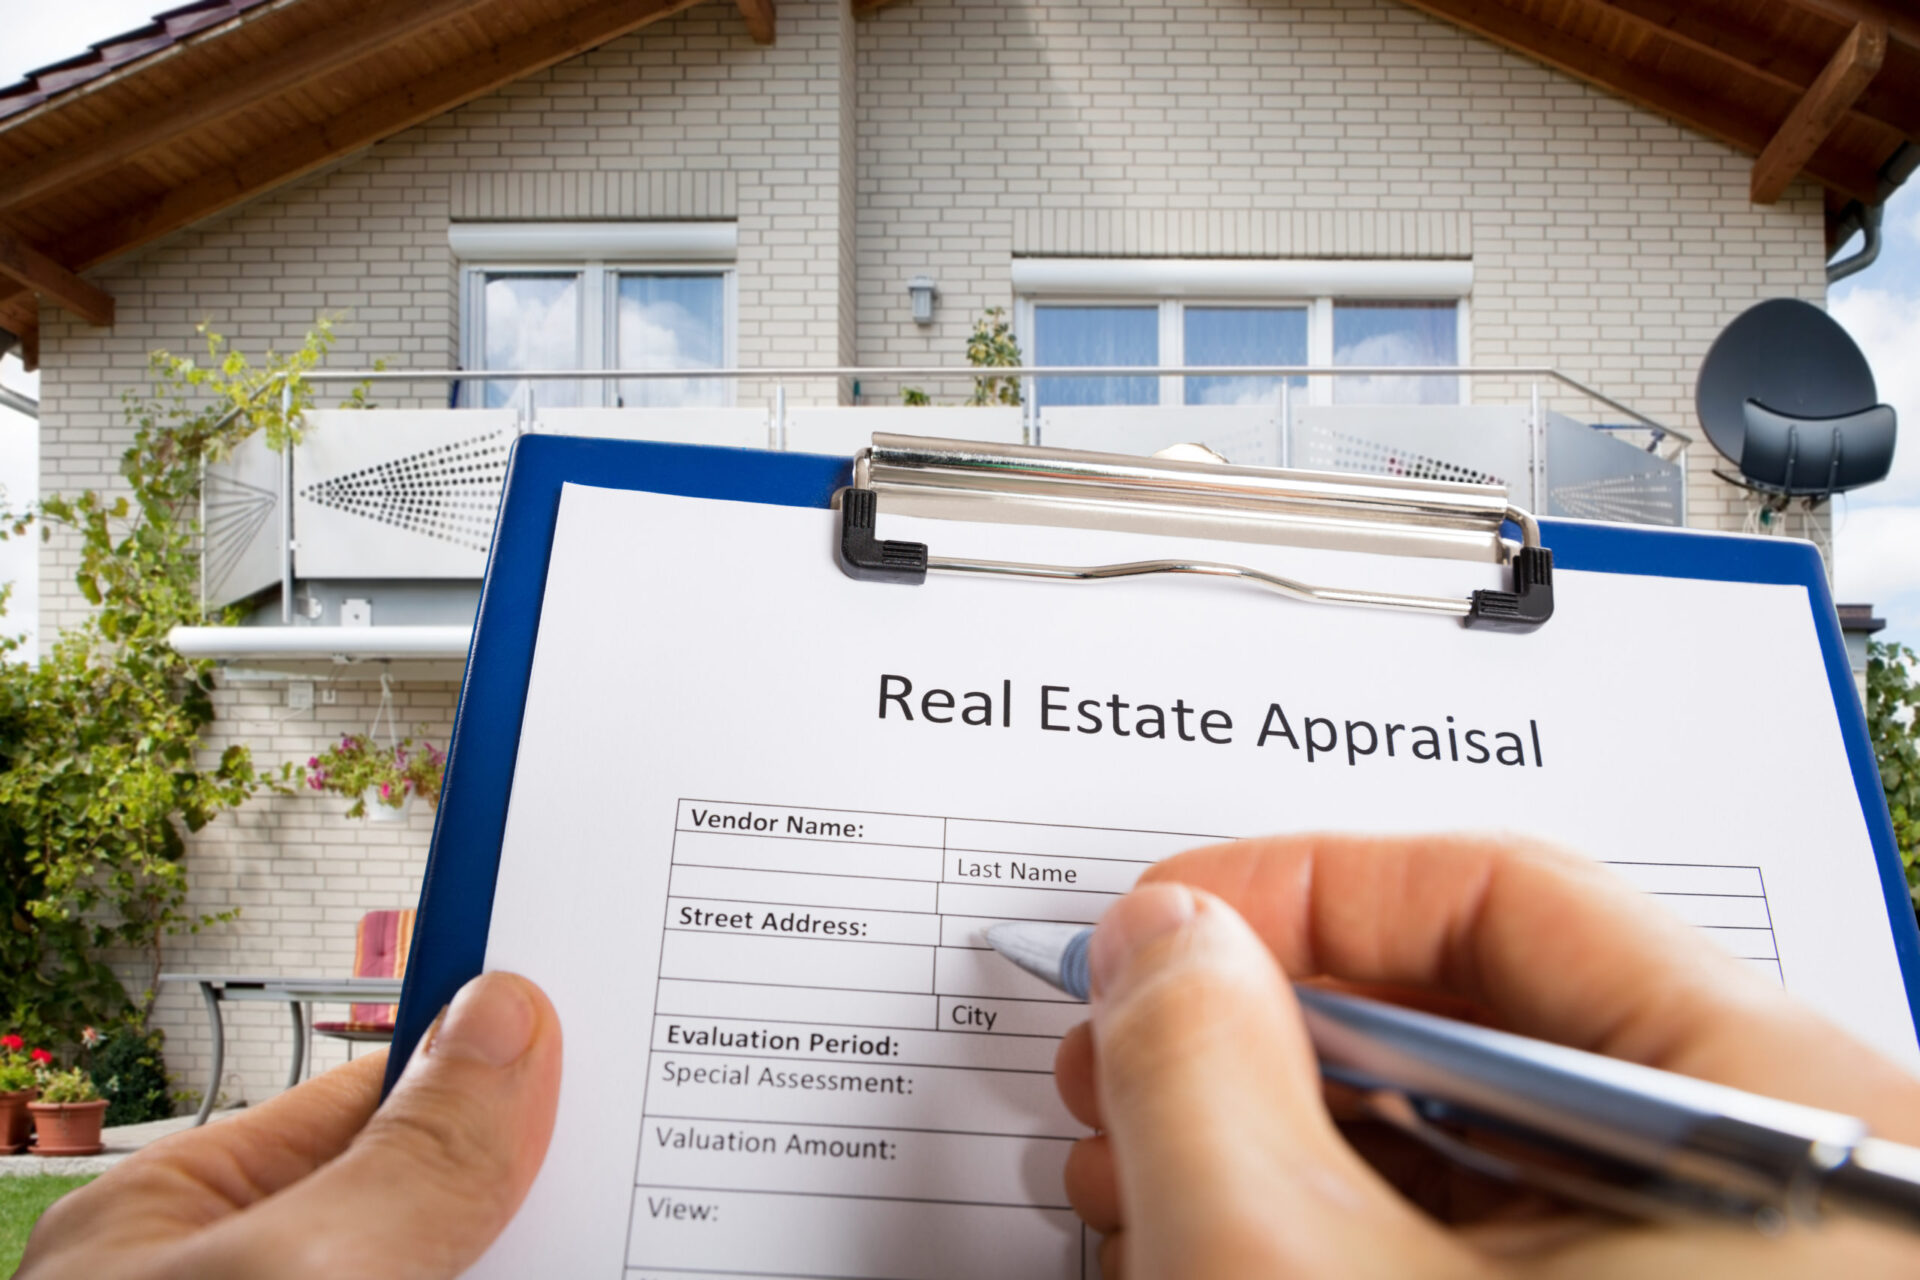 Appraisal Costs Don’t Matter To Borrowers When Choosing A Lender, Survey Finds